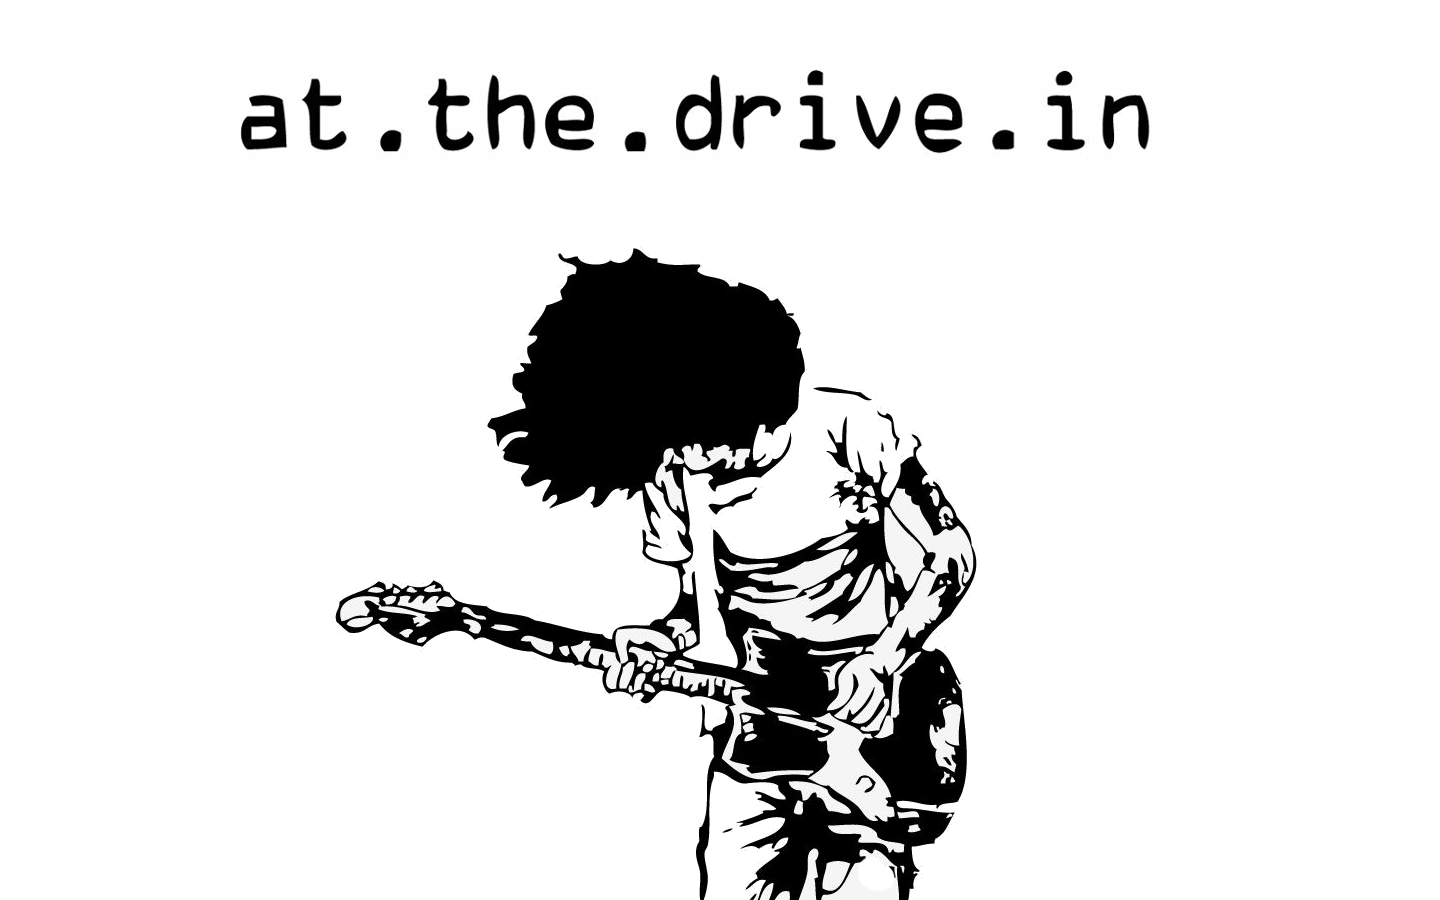 AT THE DRIVE IN Wallpaper by ~LynchMob10-09 on deviantART